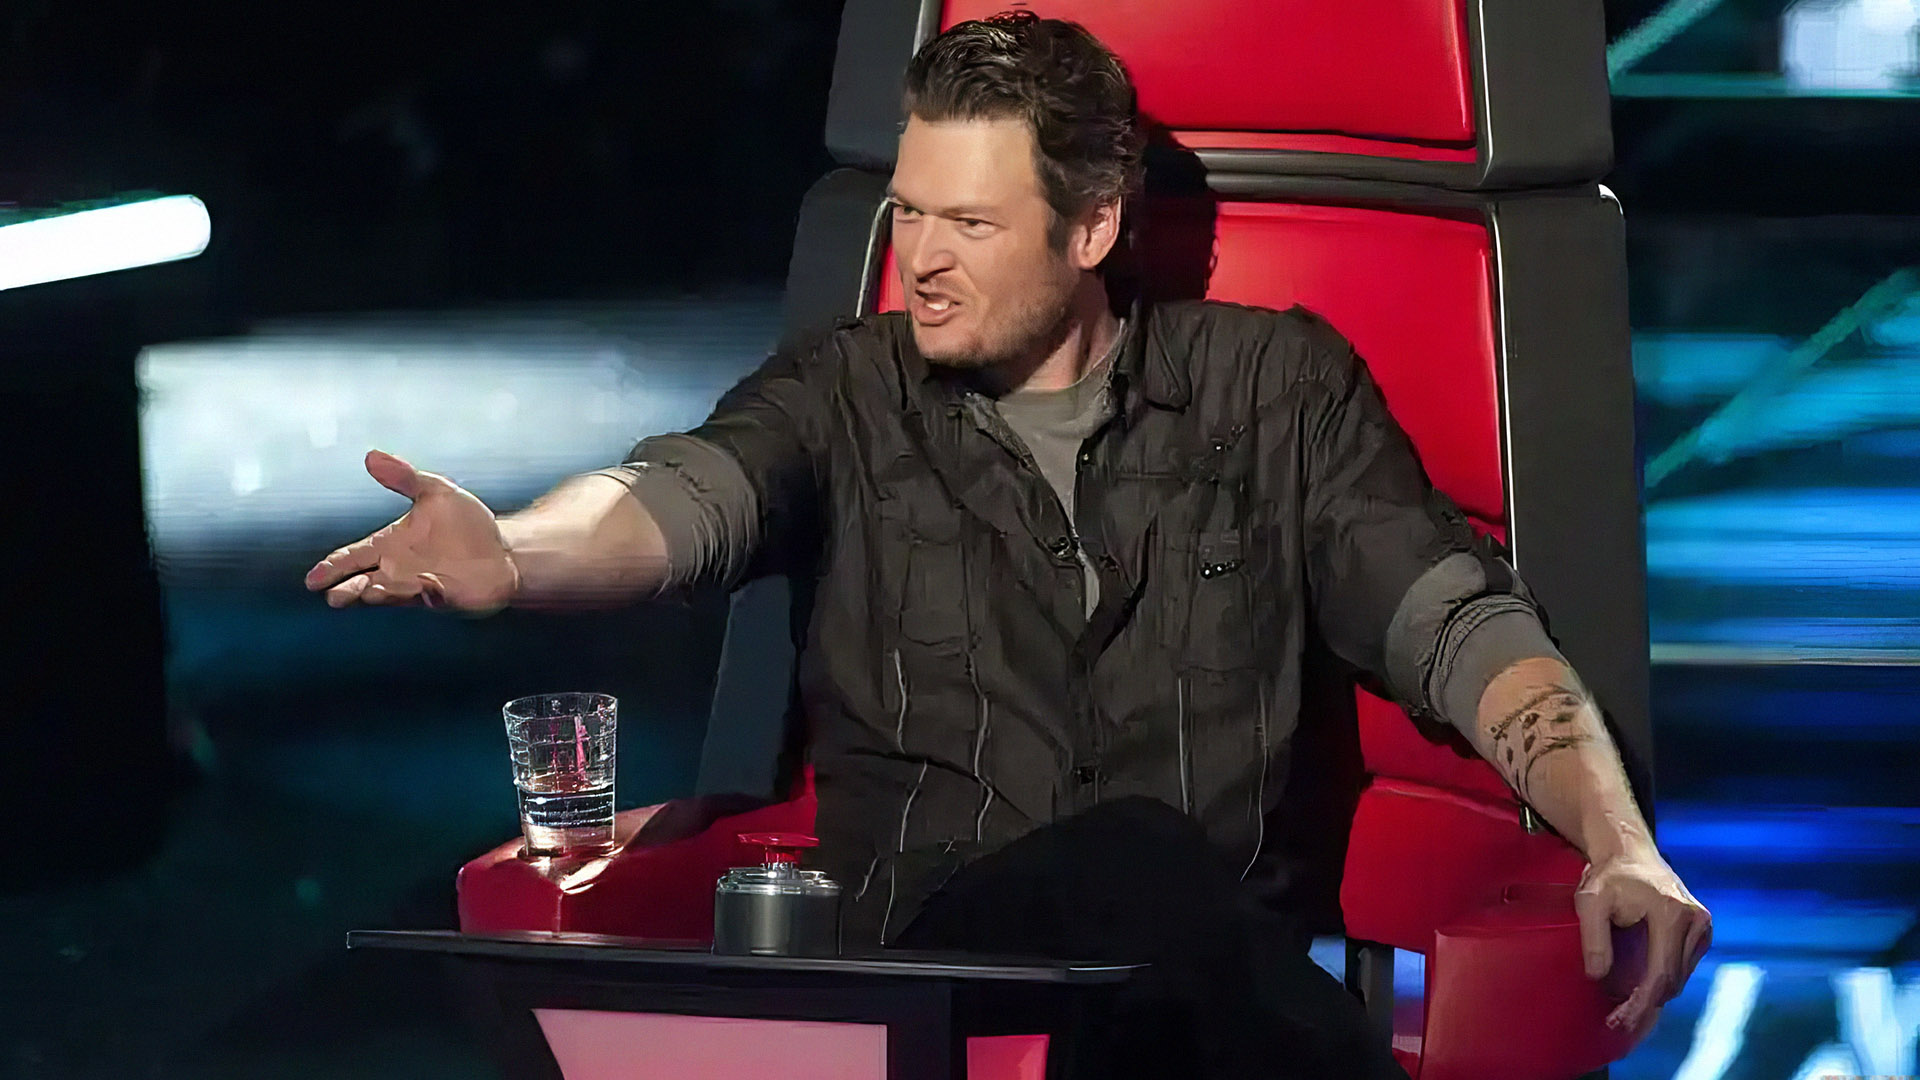 What to Expect From The Voice 24? 5 Things to Look Out For in the Upcoming Season